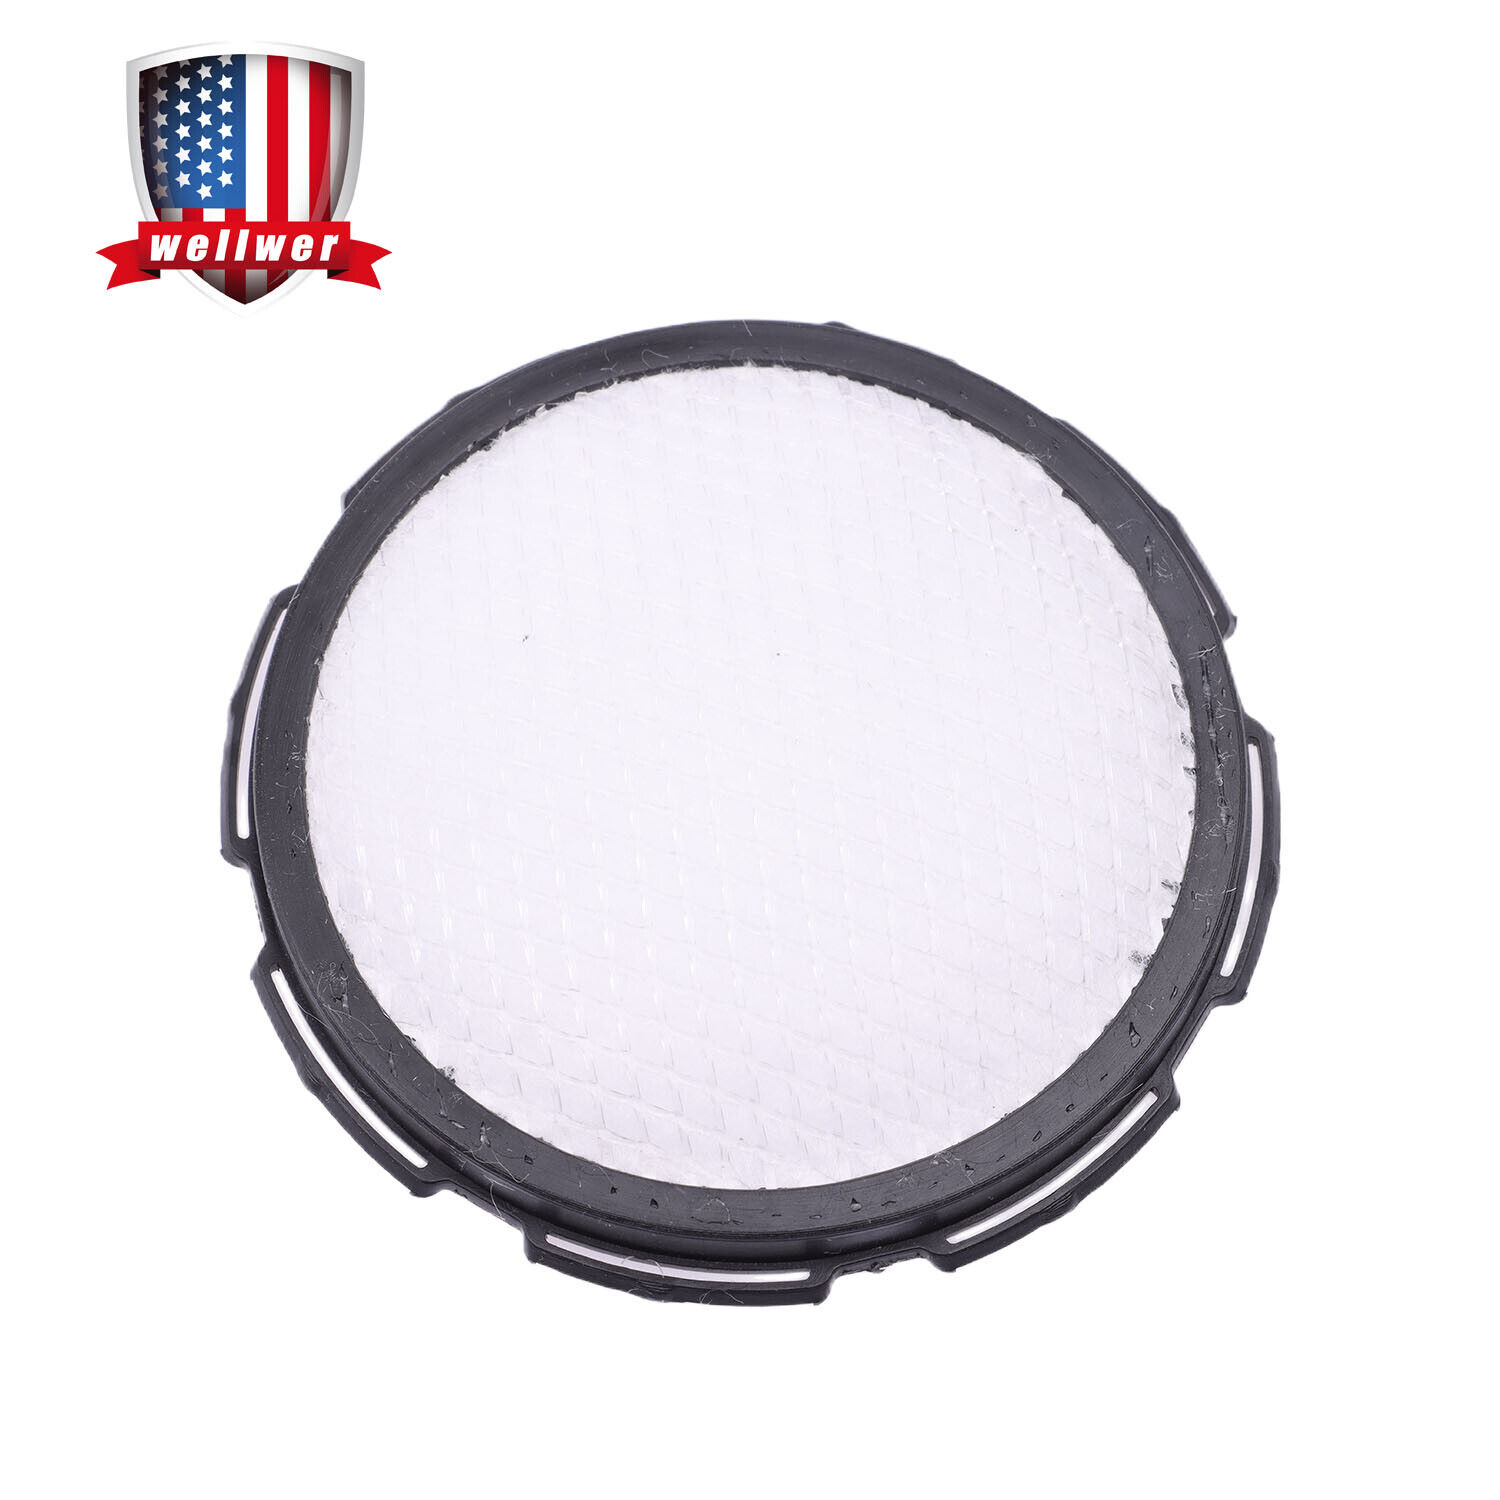 New Seat Air Filter Front for Lexus LS460 LS600H 2015 2016 2017 88921-50020